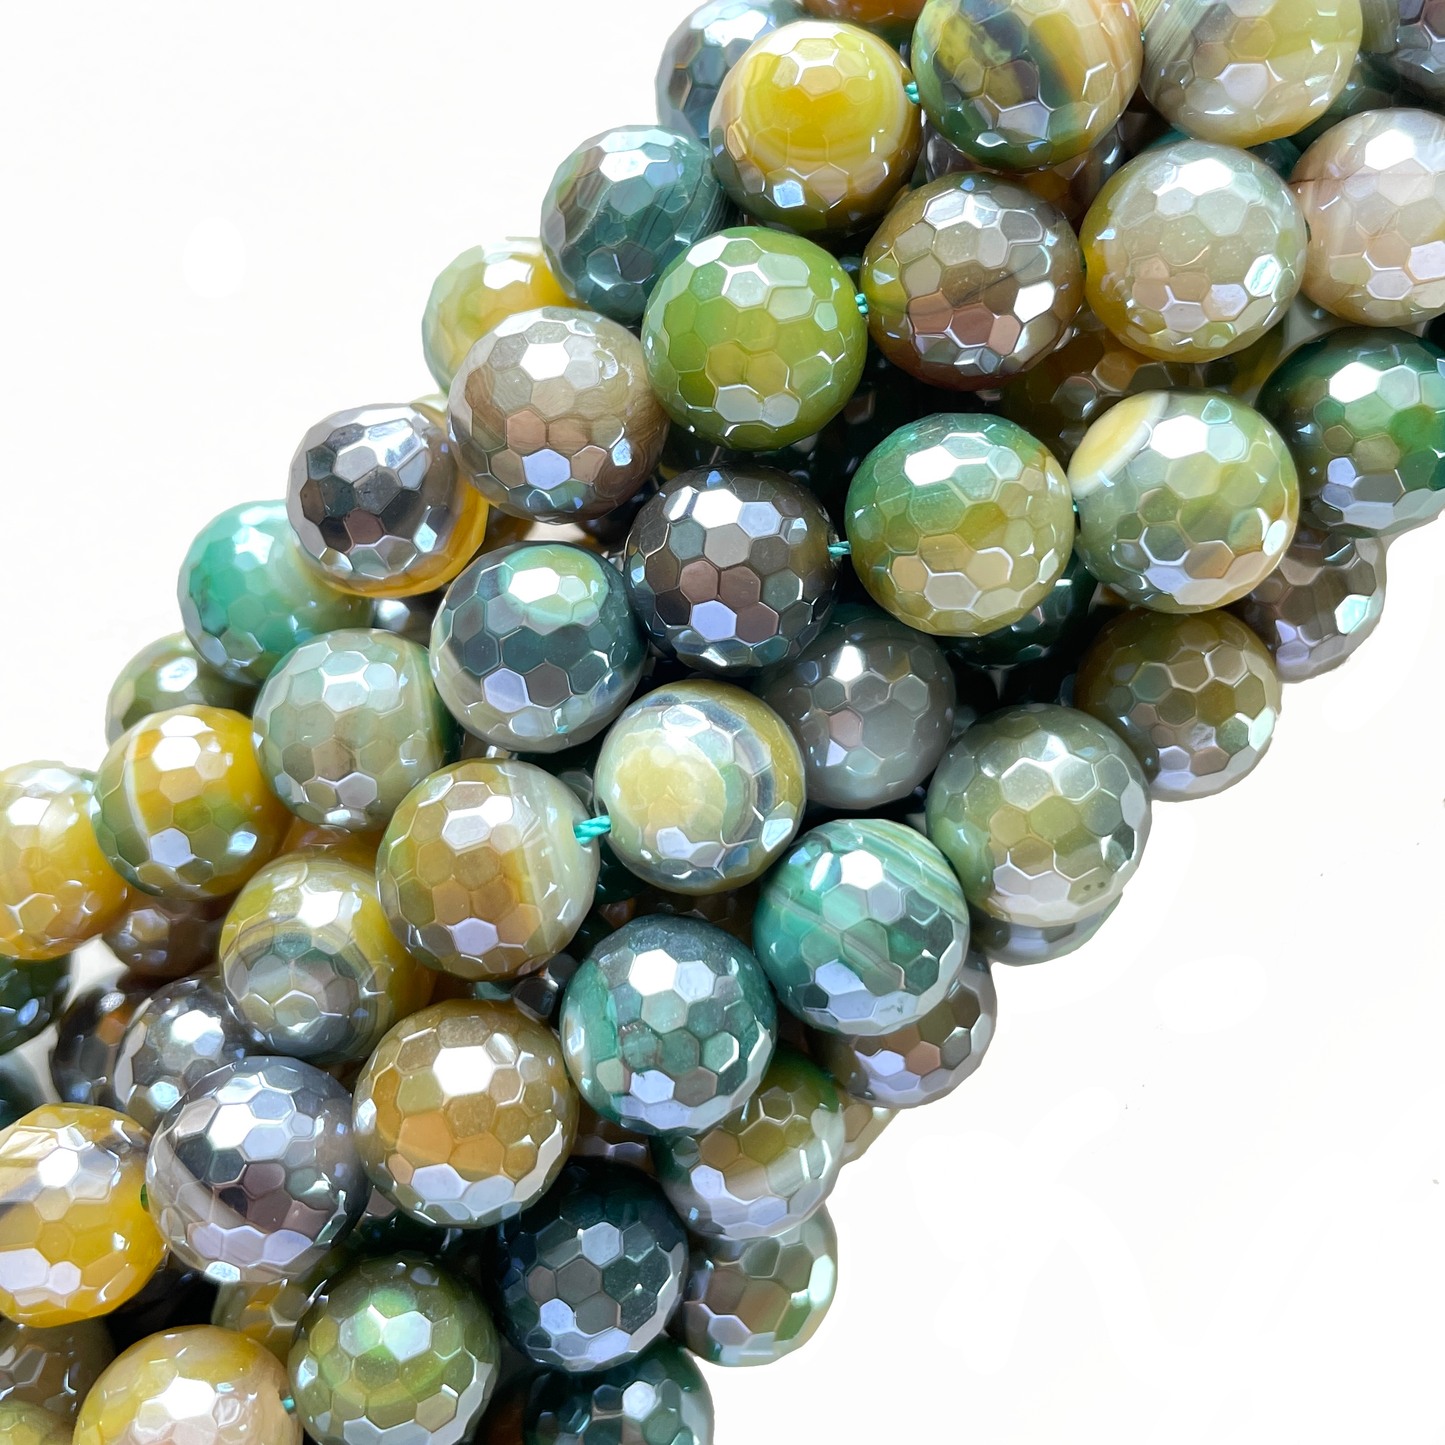 10, 12mm Electroplated Green Yellow Banded Agate Stone Faceted Beads-Grade A Premium Quality Electroplated Beads 12mm Stone Beads New Beads Arrivals Premium Quality Agate Beads Charms Beads Beyond